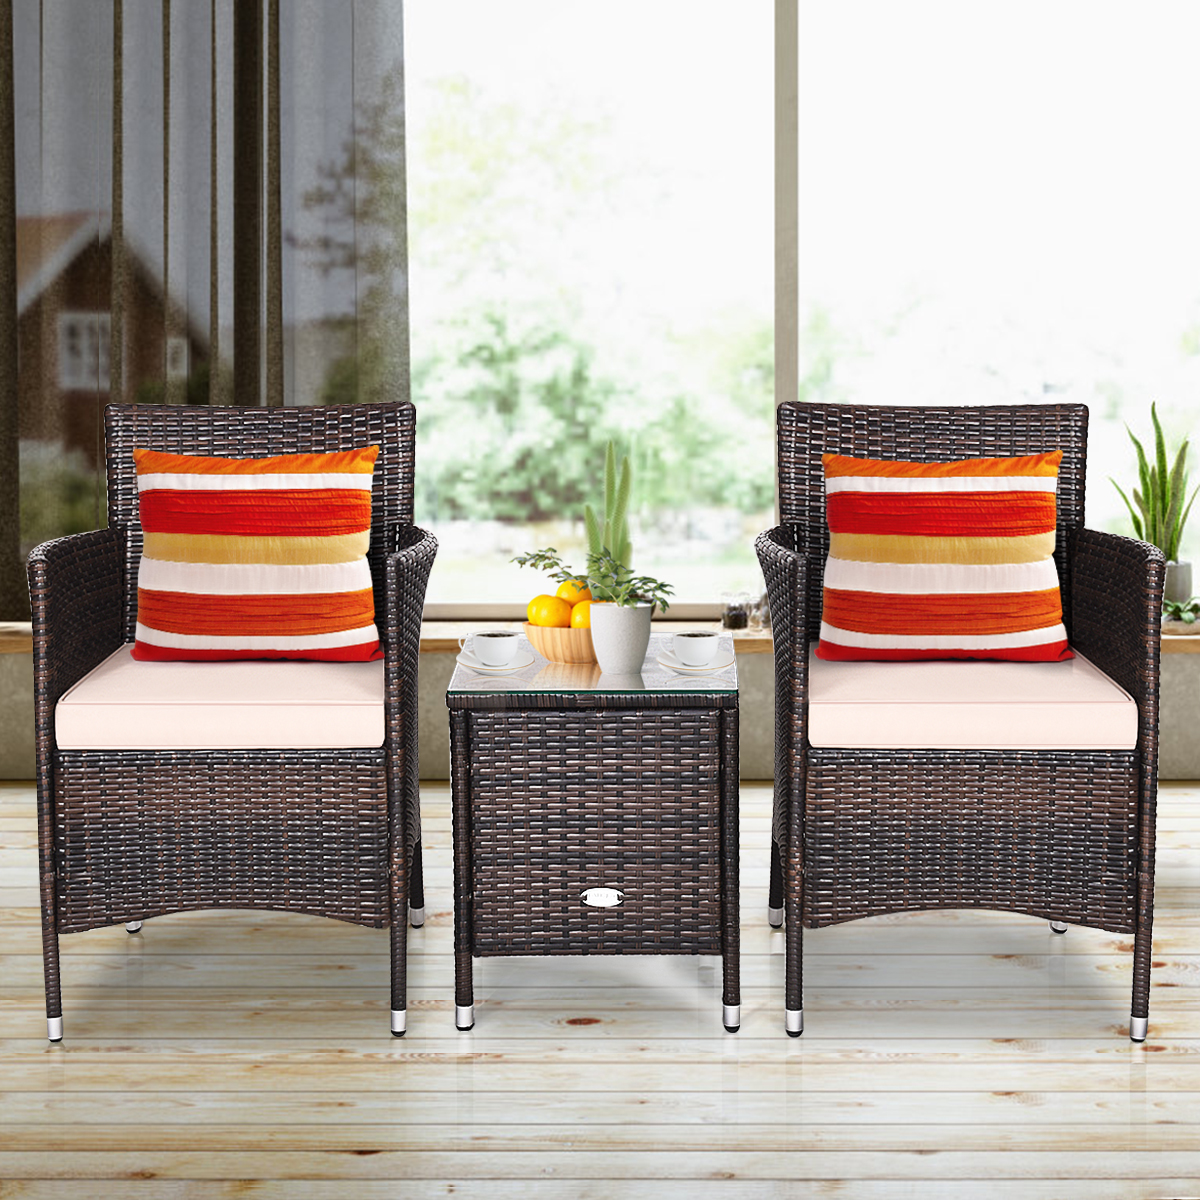 Gymax 3PCS Patio Rattan Chair & Table Furniture Set Outdoor w/ Beige Cushion - image 3 of 10